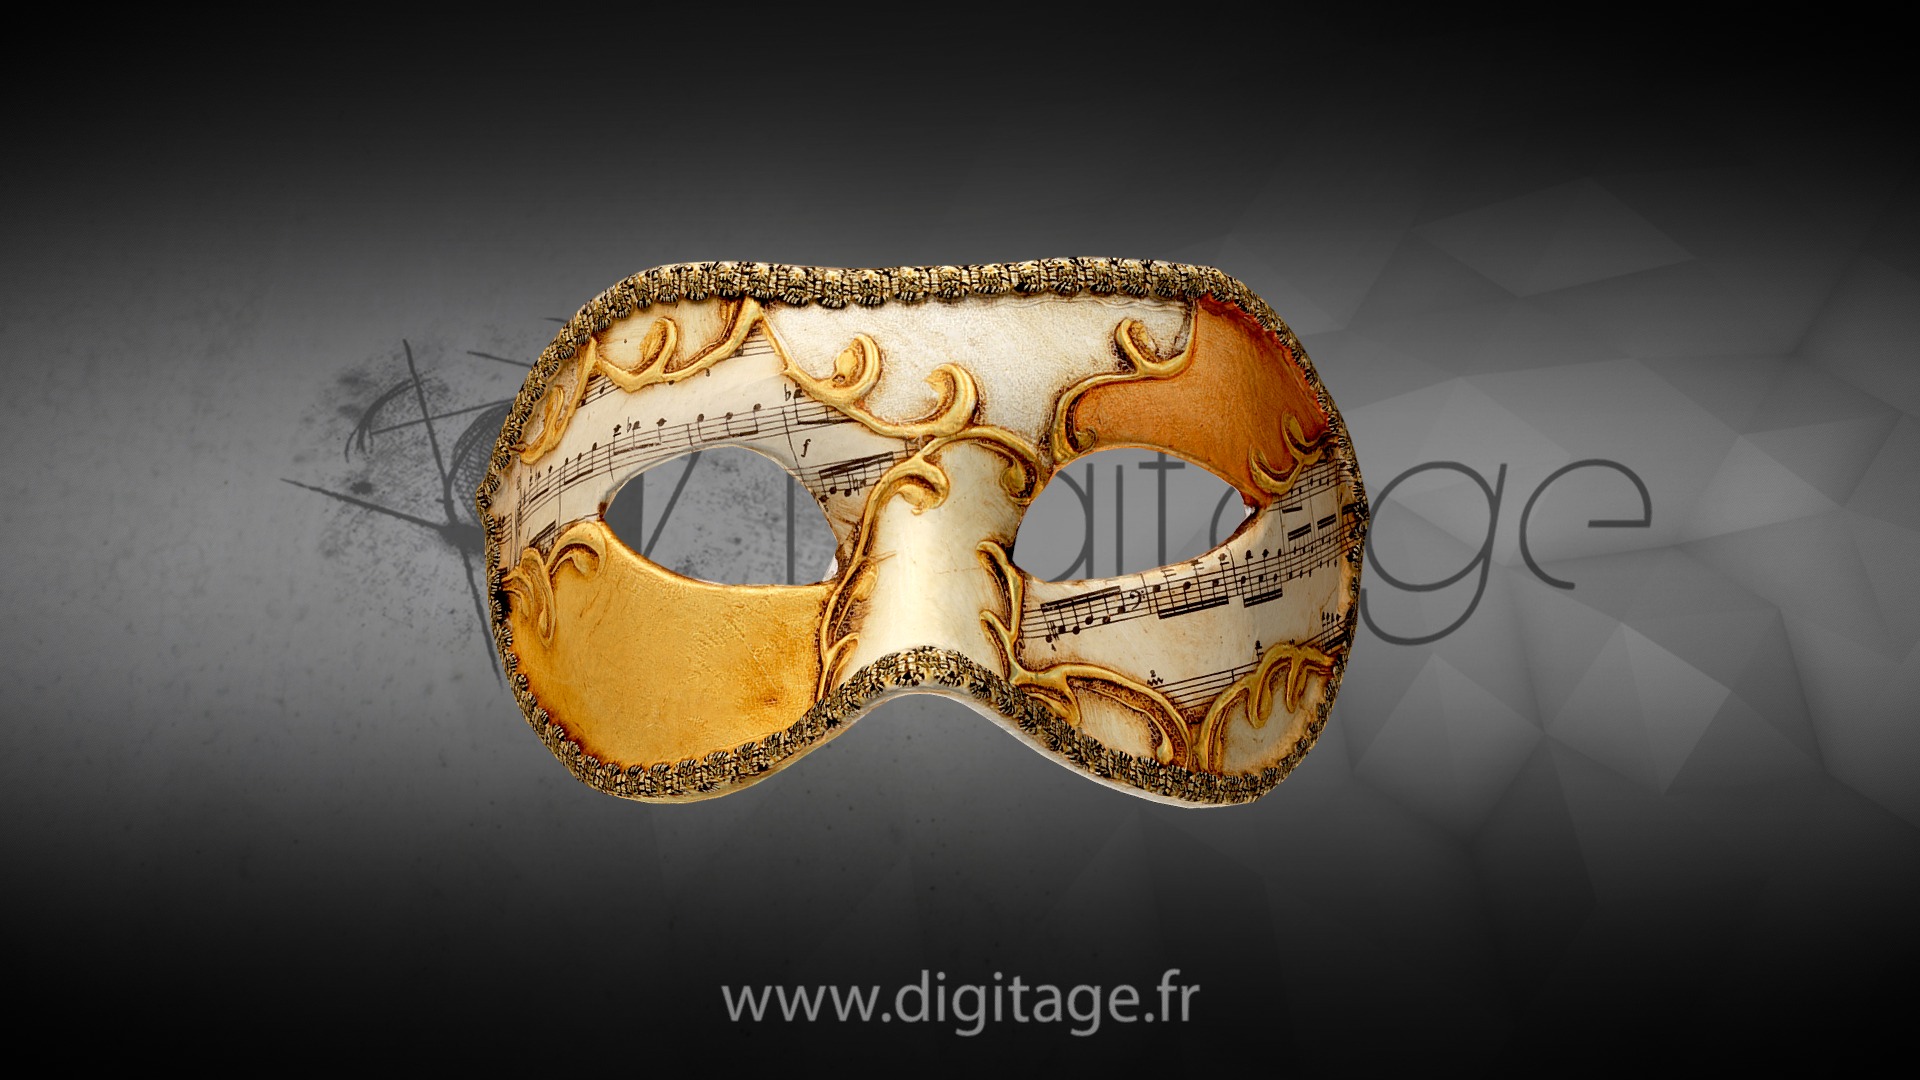 3D model Venitian Mask - This is a 3D model of the Venitian Mask. The 3D model is about a logo with a person's face on it.